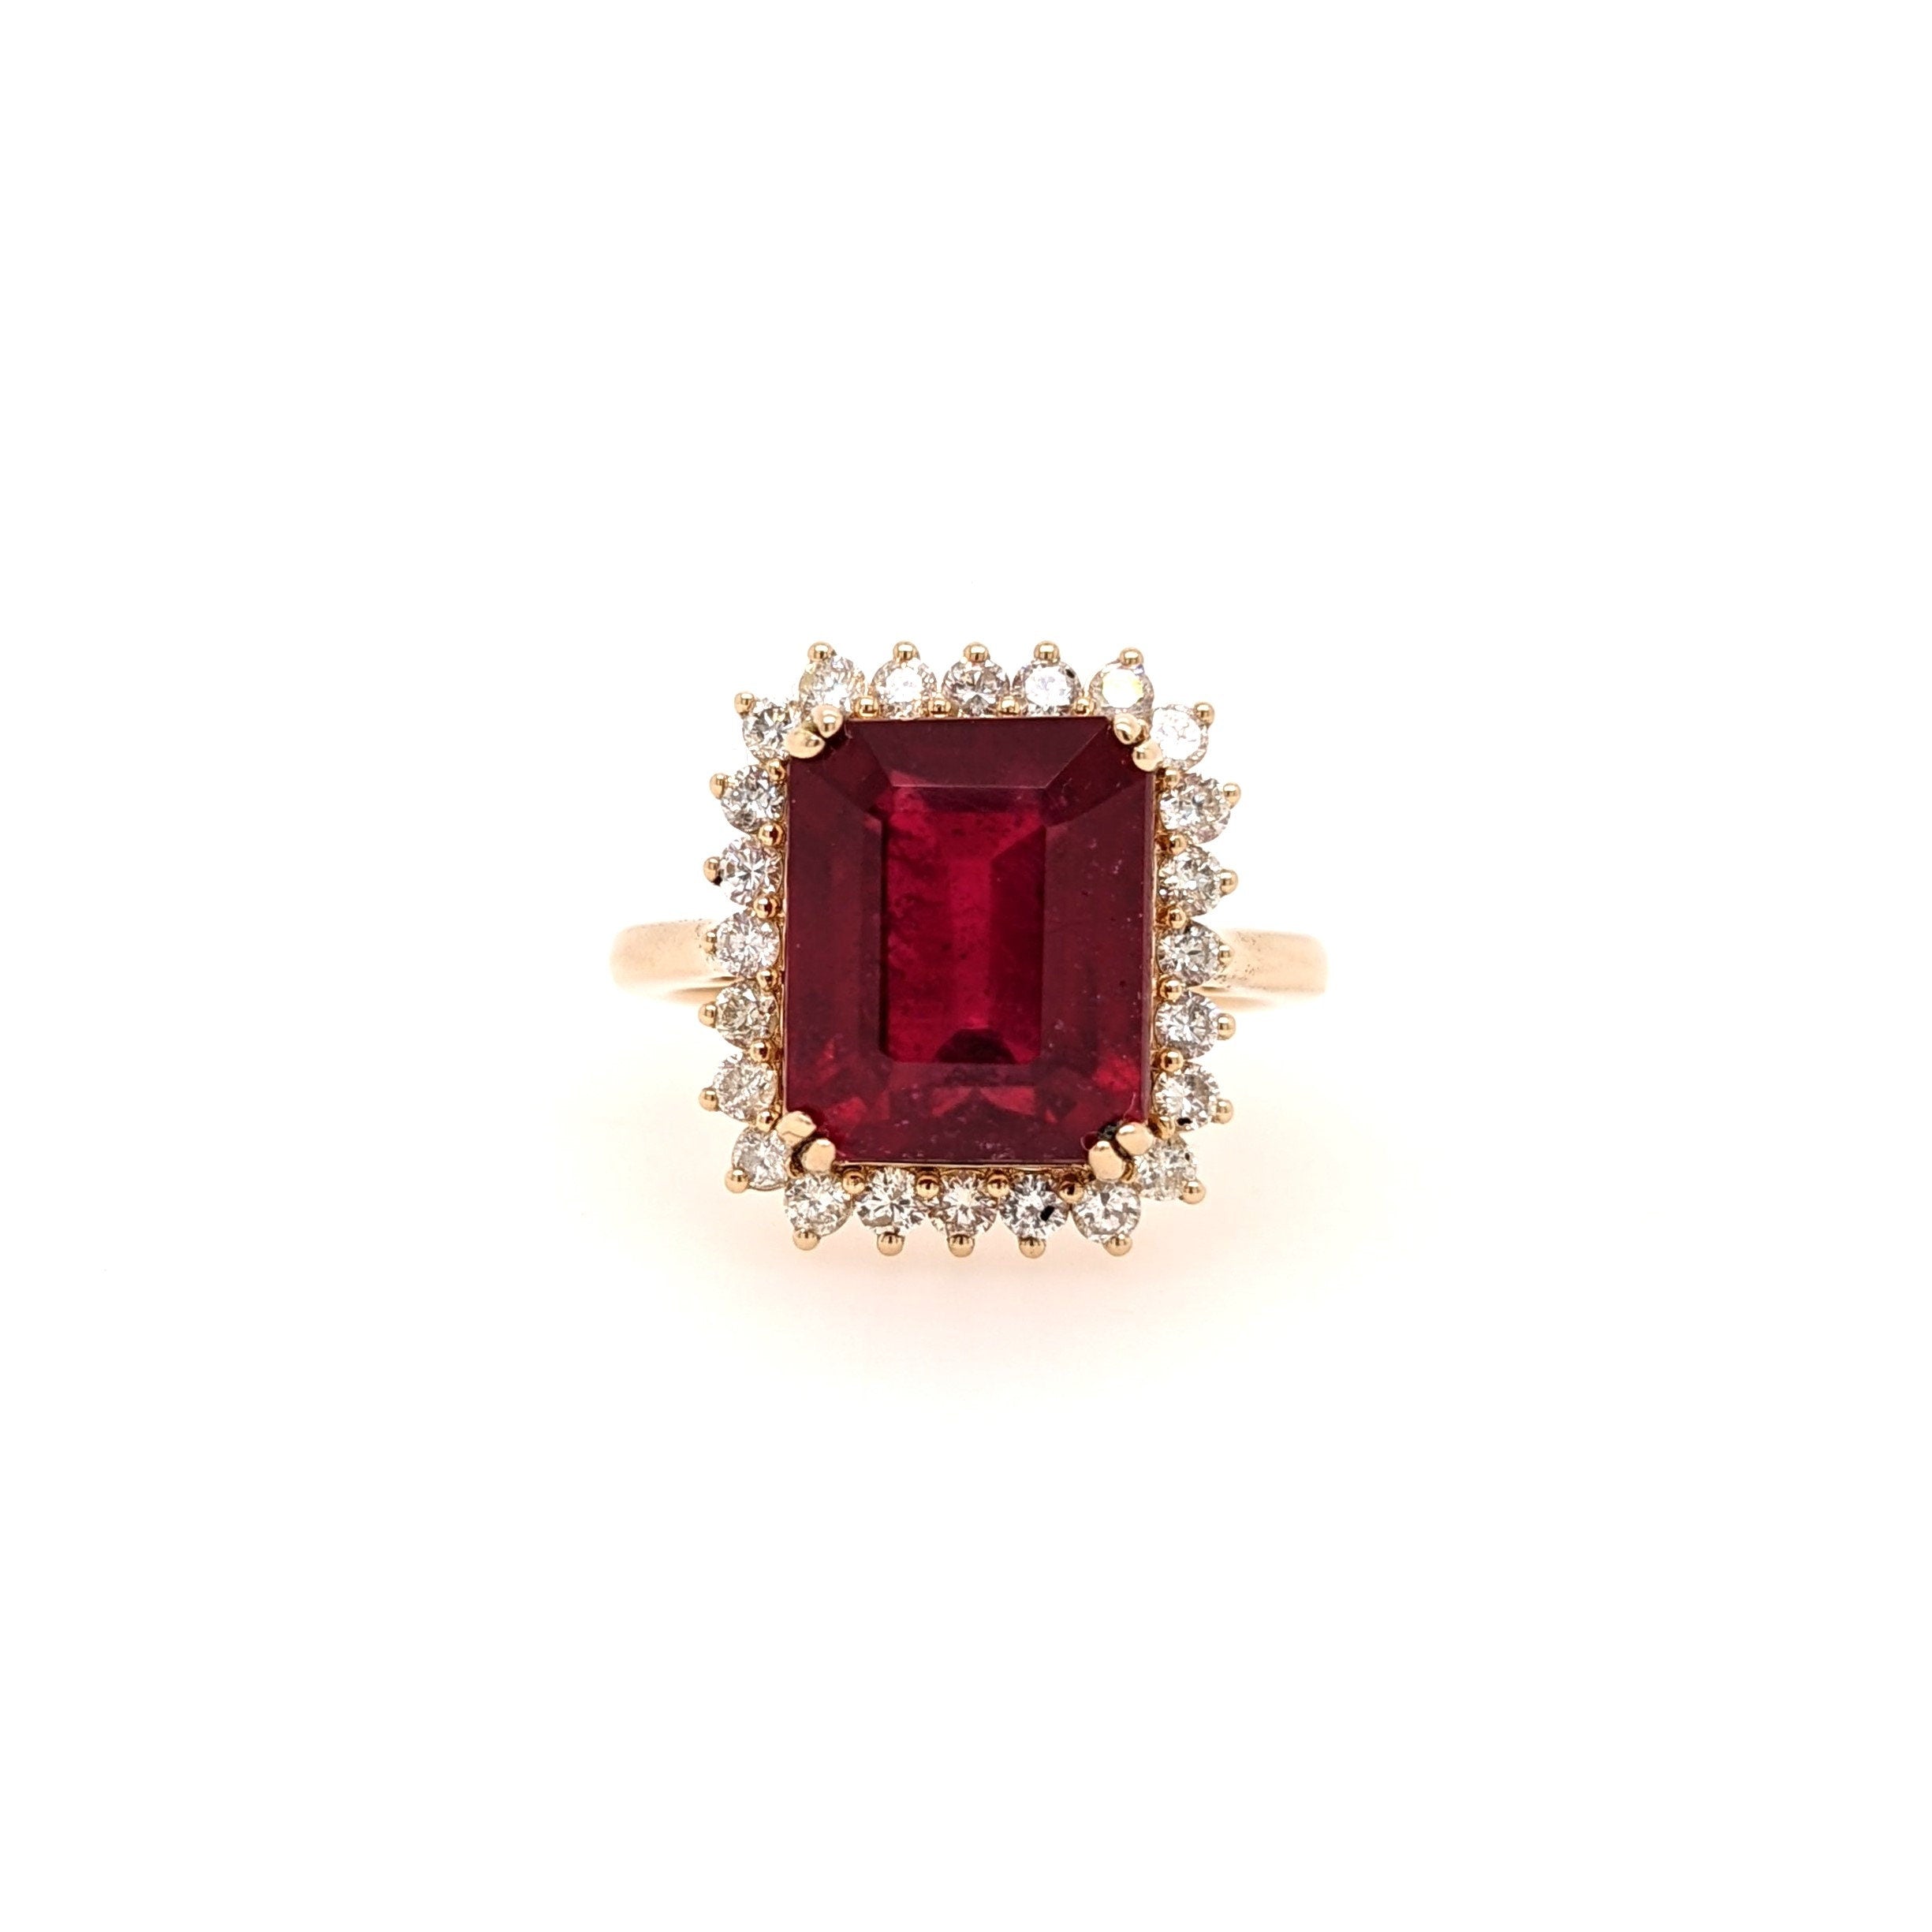 8 carat Ruby Ring w an Earth Mined Diamond Halo | Solid 14K Yellow Gold | Emerald Cut 11x9mm | Pigeon Blood | Red Gemstone | July Birthstone